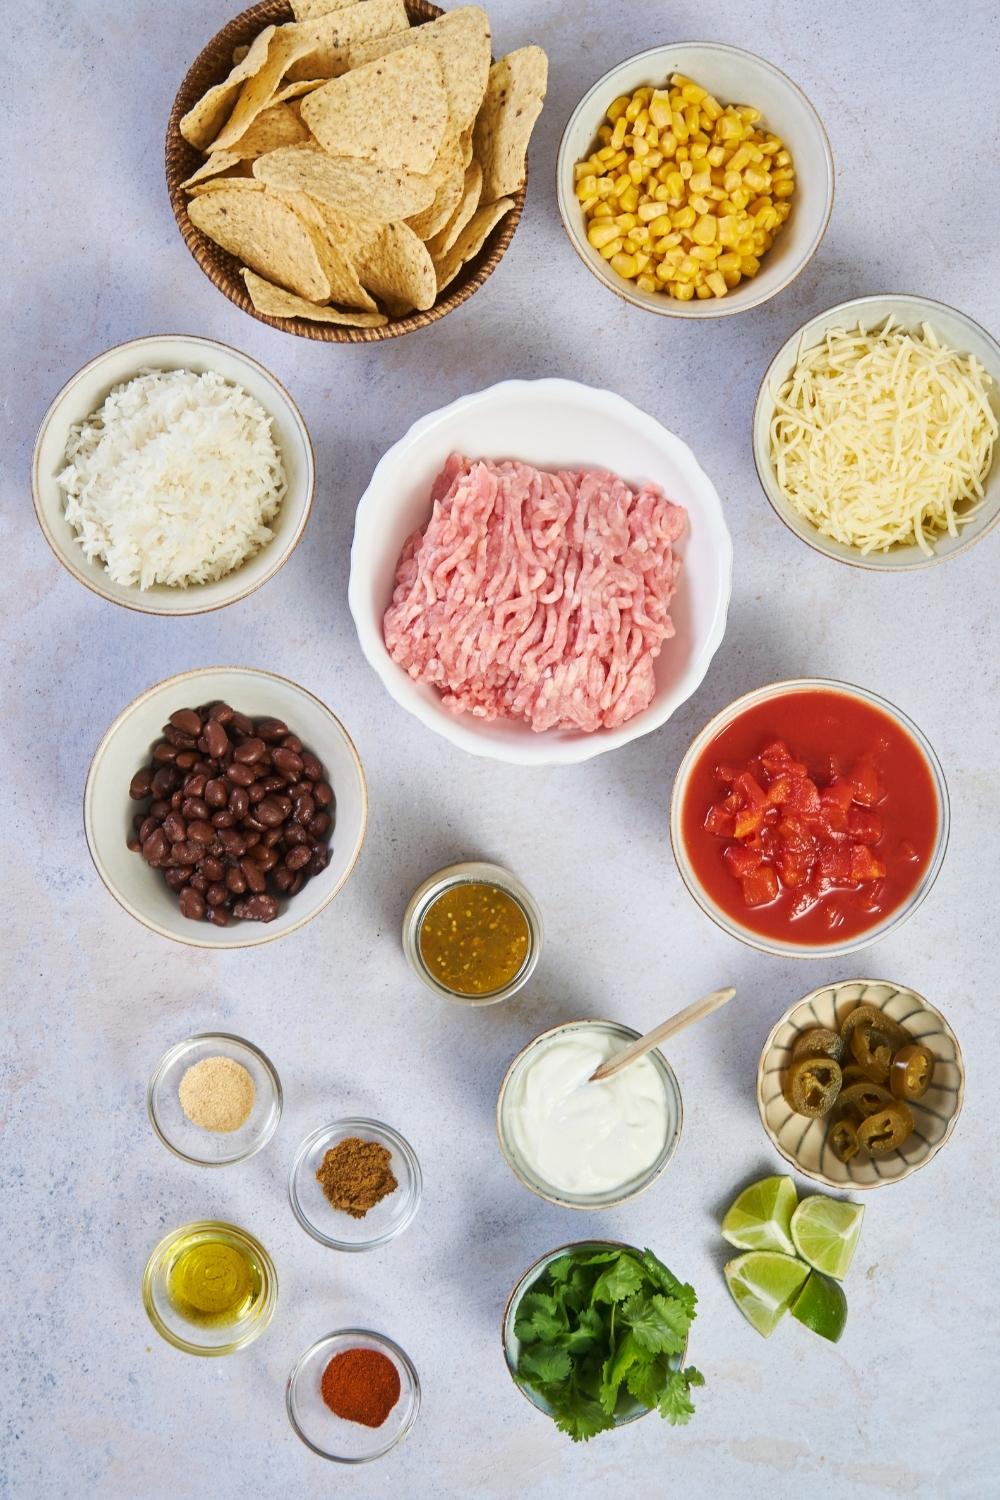 An assortment of ingredients for ground turkey casserole including bowls of raw ground turkey, tomato sauce, cheese, corn, salsa, beans, rice, and tortilla chips